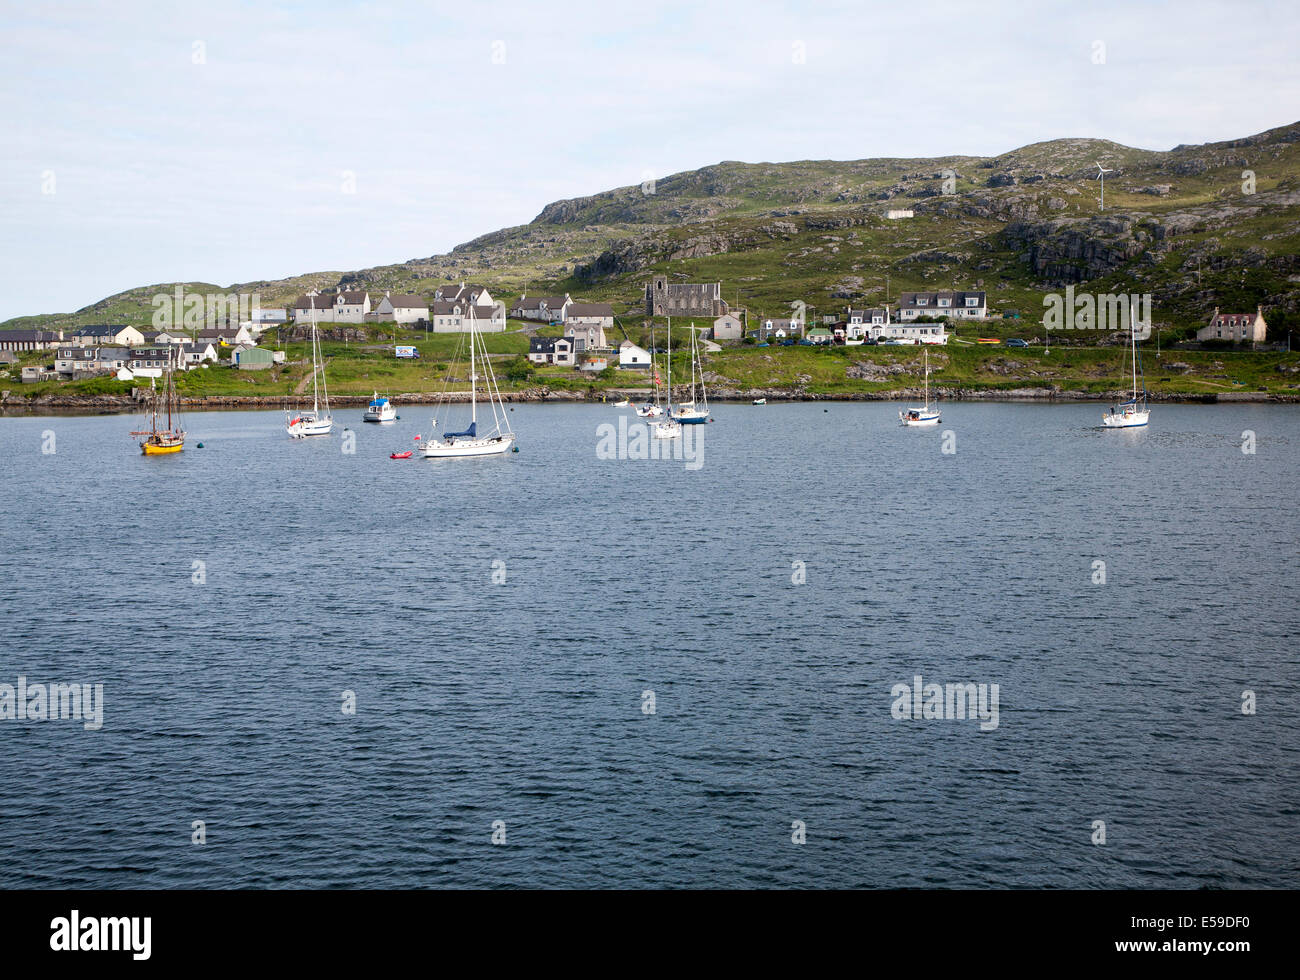 Yachts moored in the harbour at Castlebay, Barra, Outer Hebrides, Scotland Stock Photo